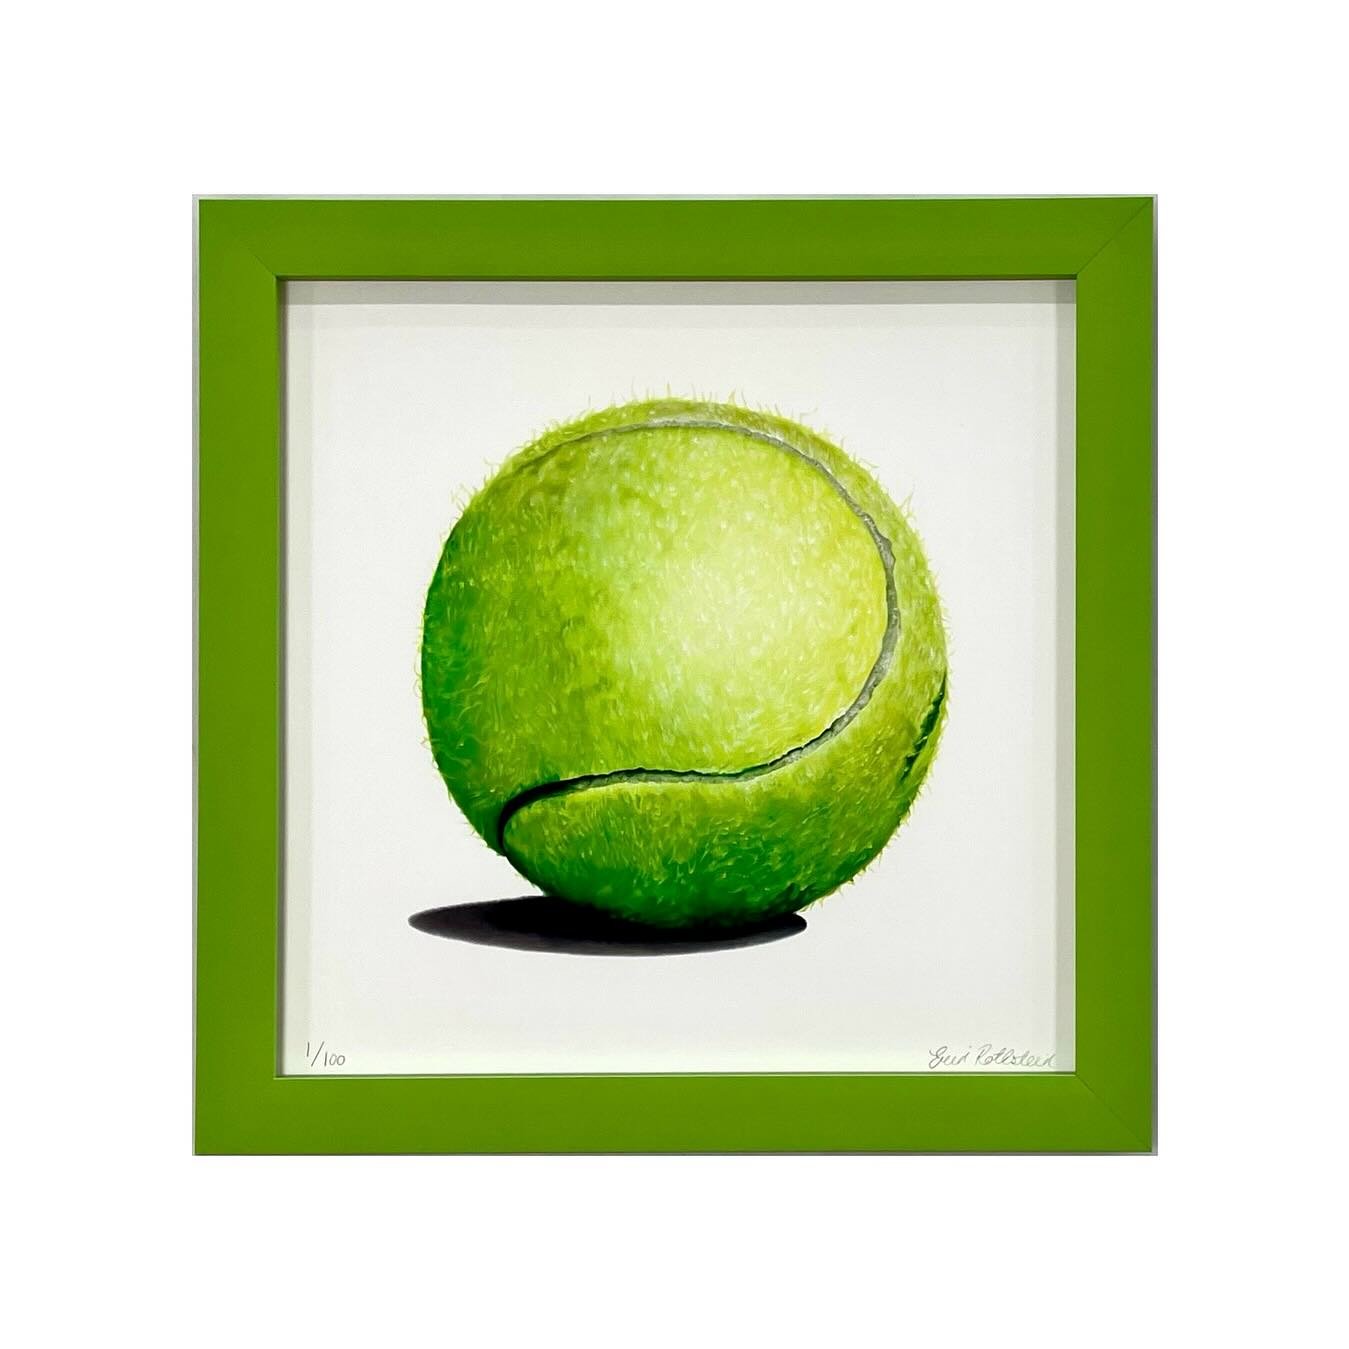 Bouncing into spring this year 🎾☀️

We love seeing fun prints like this come through production! Our customer had this piece framed as a gift for a tennis loving family member.

The @ampfframes &ldquo;light green carnivale&rdquo; frame was a perfect